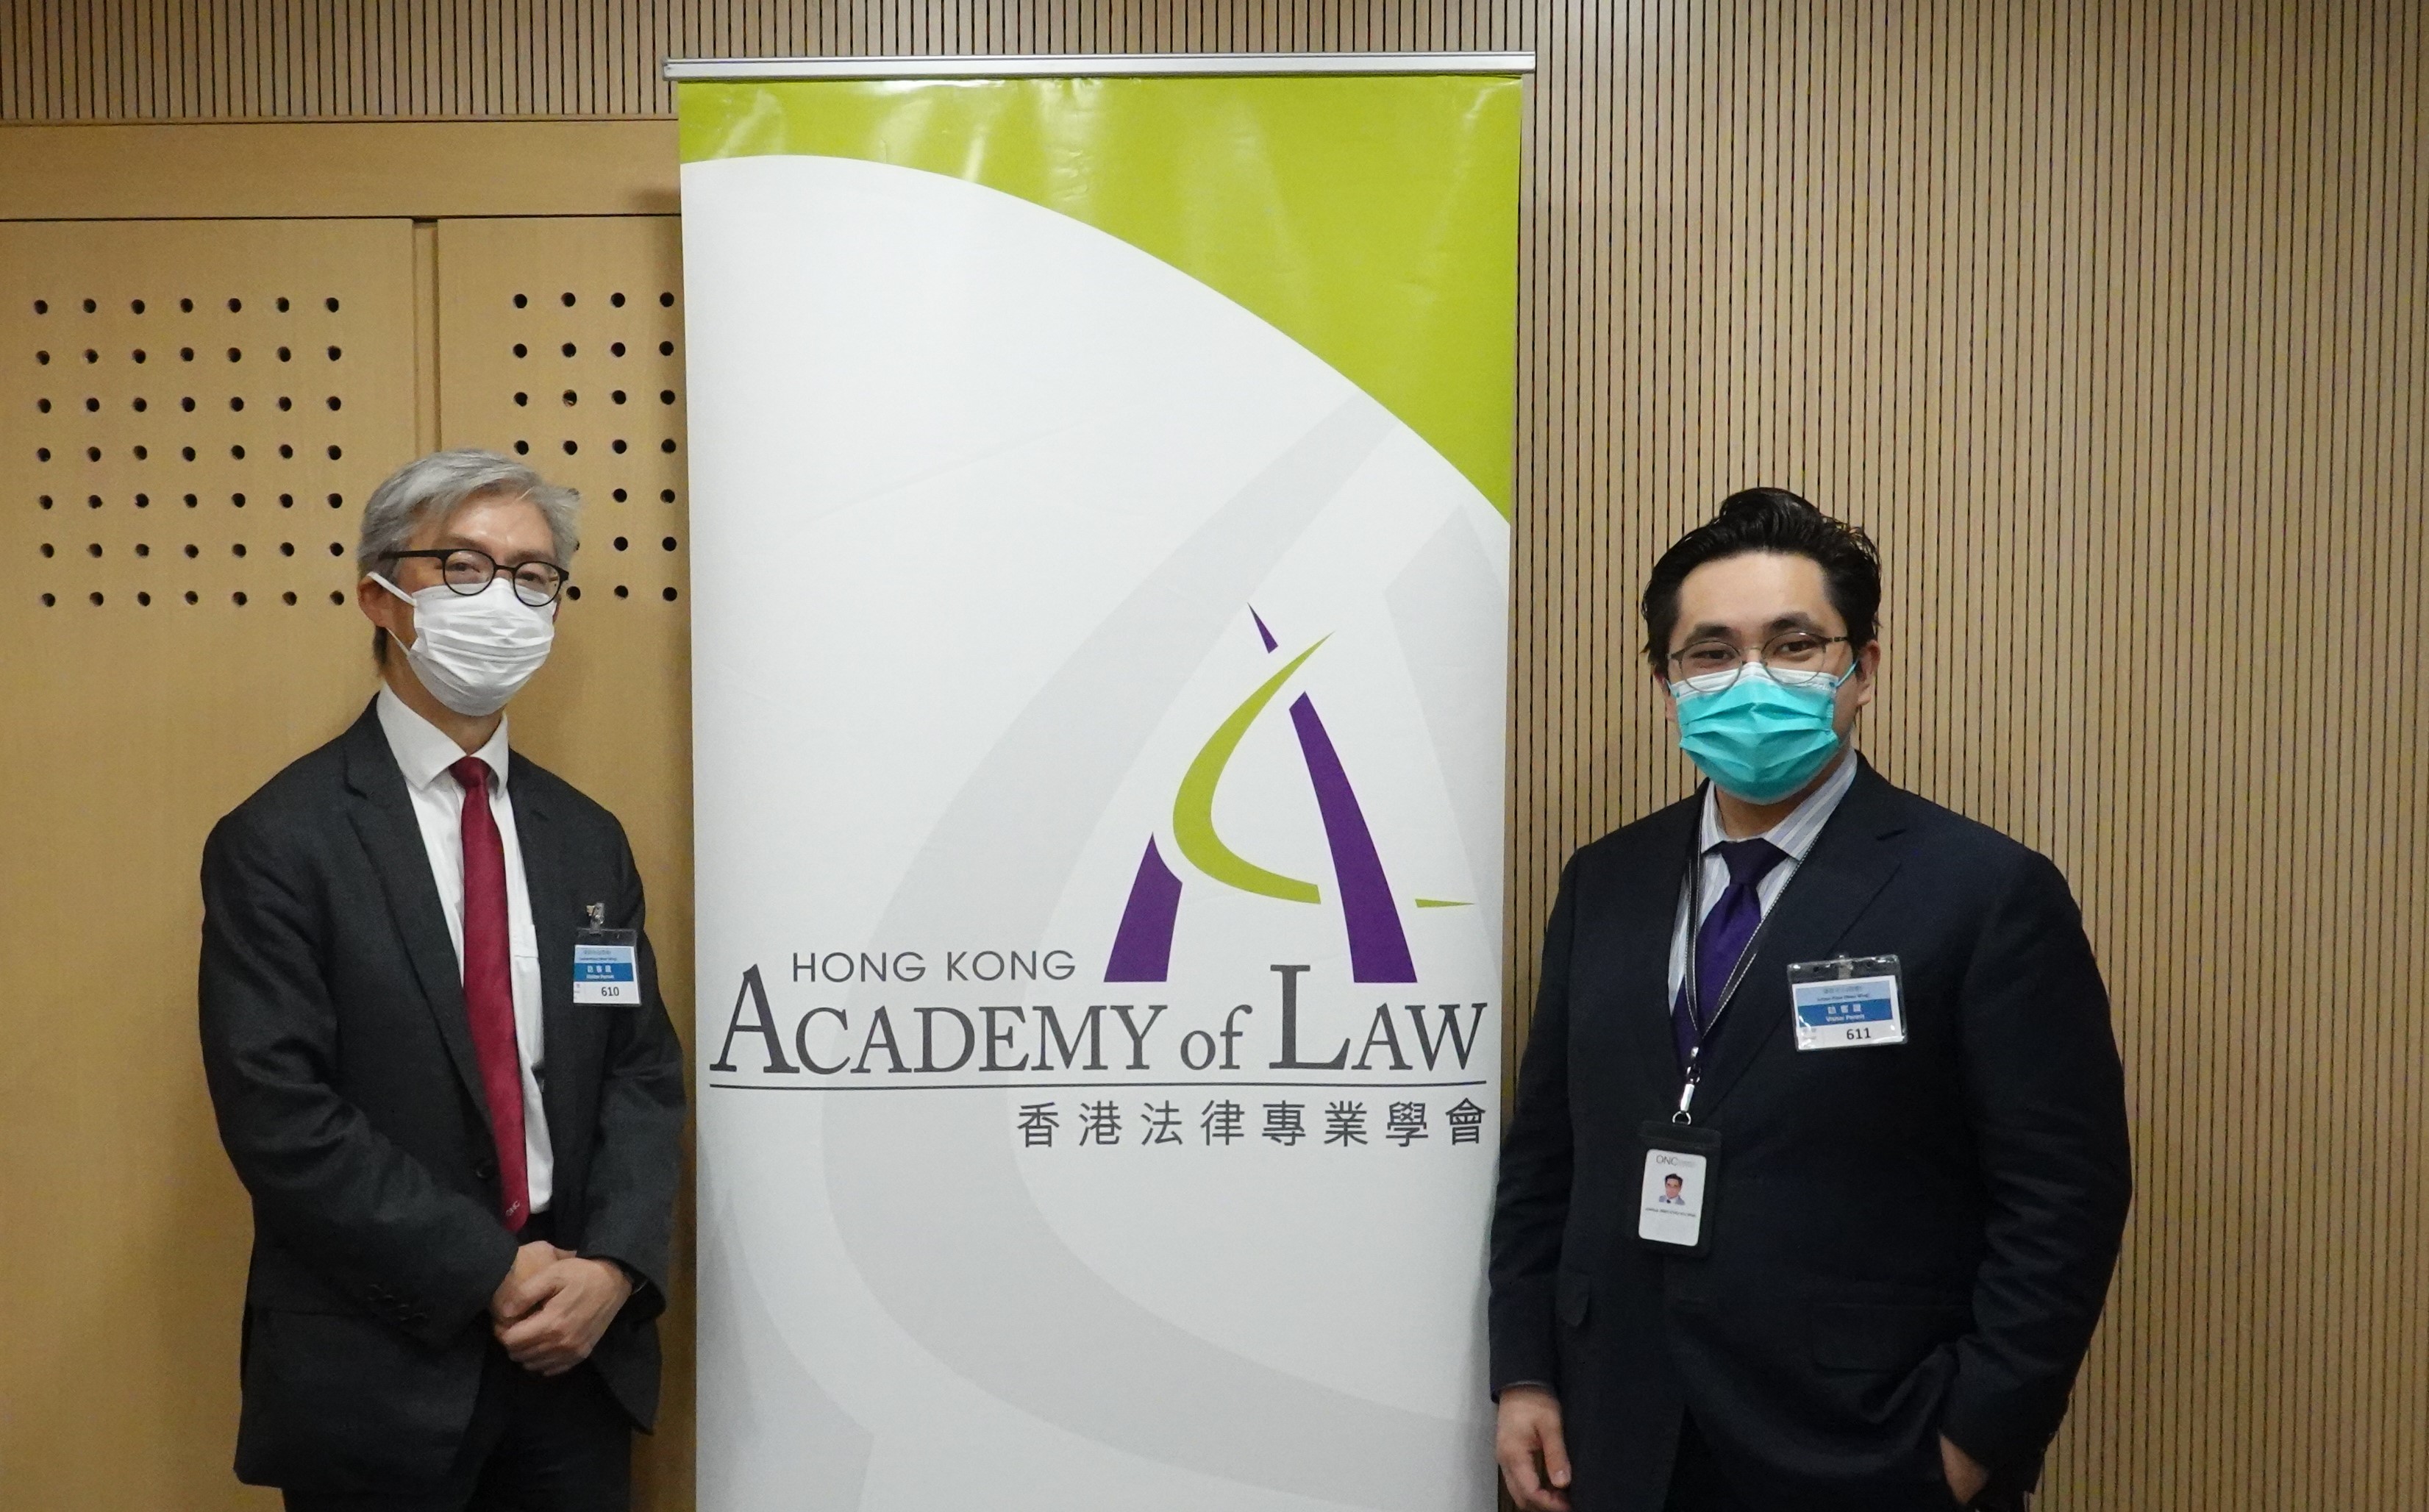 Dominic Wai & Joshua Chu of ONC Lawyers gave an RME course for the Academy of Law on managing data breach